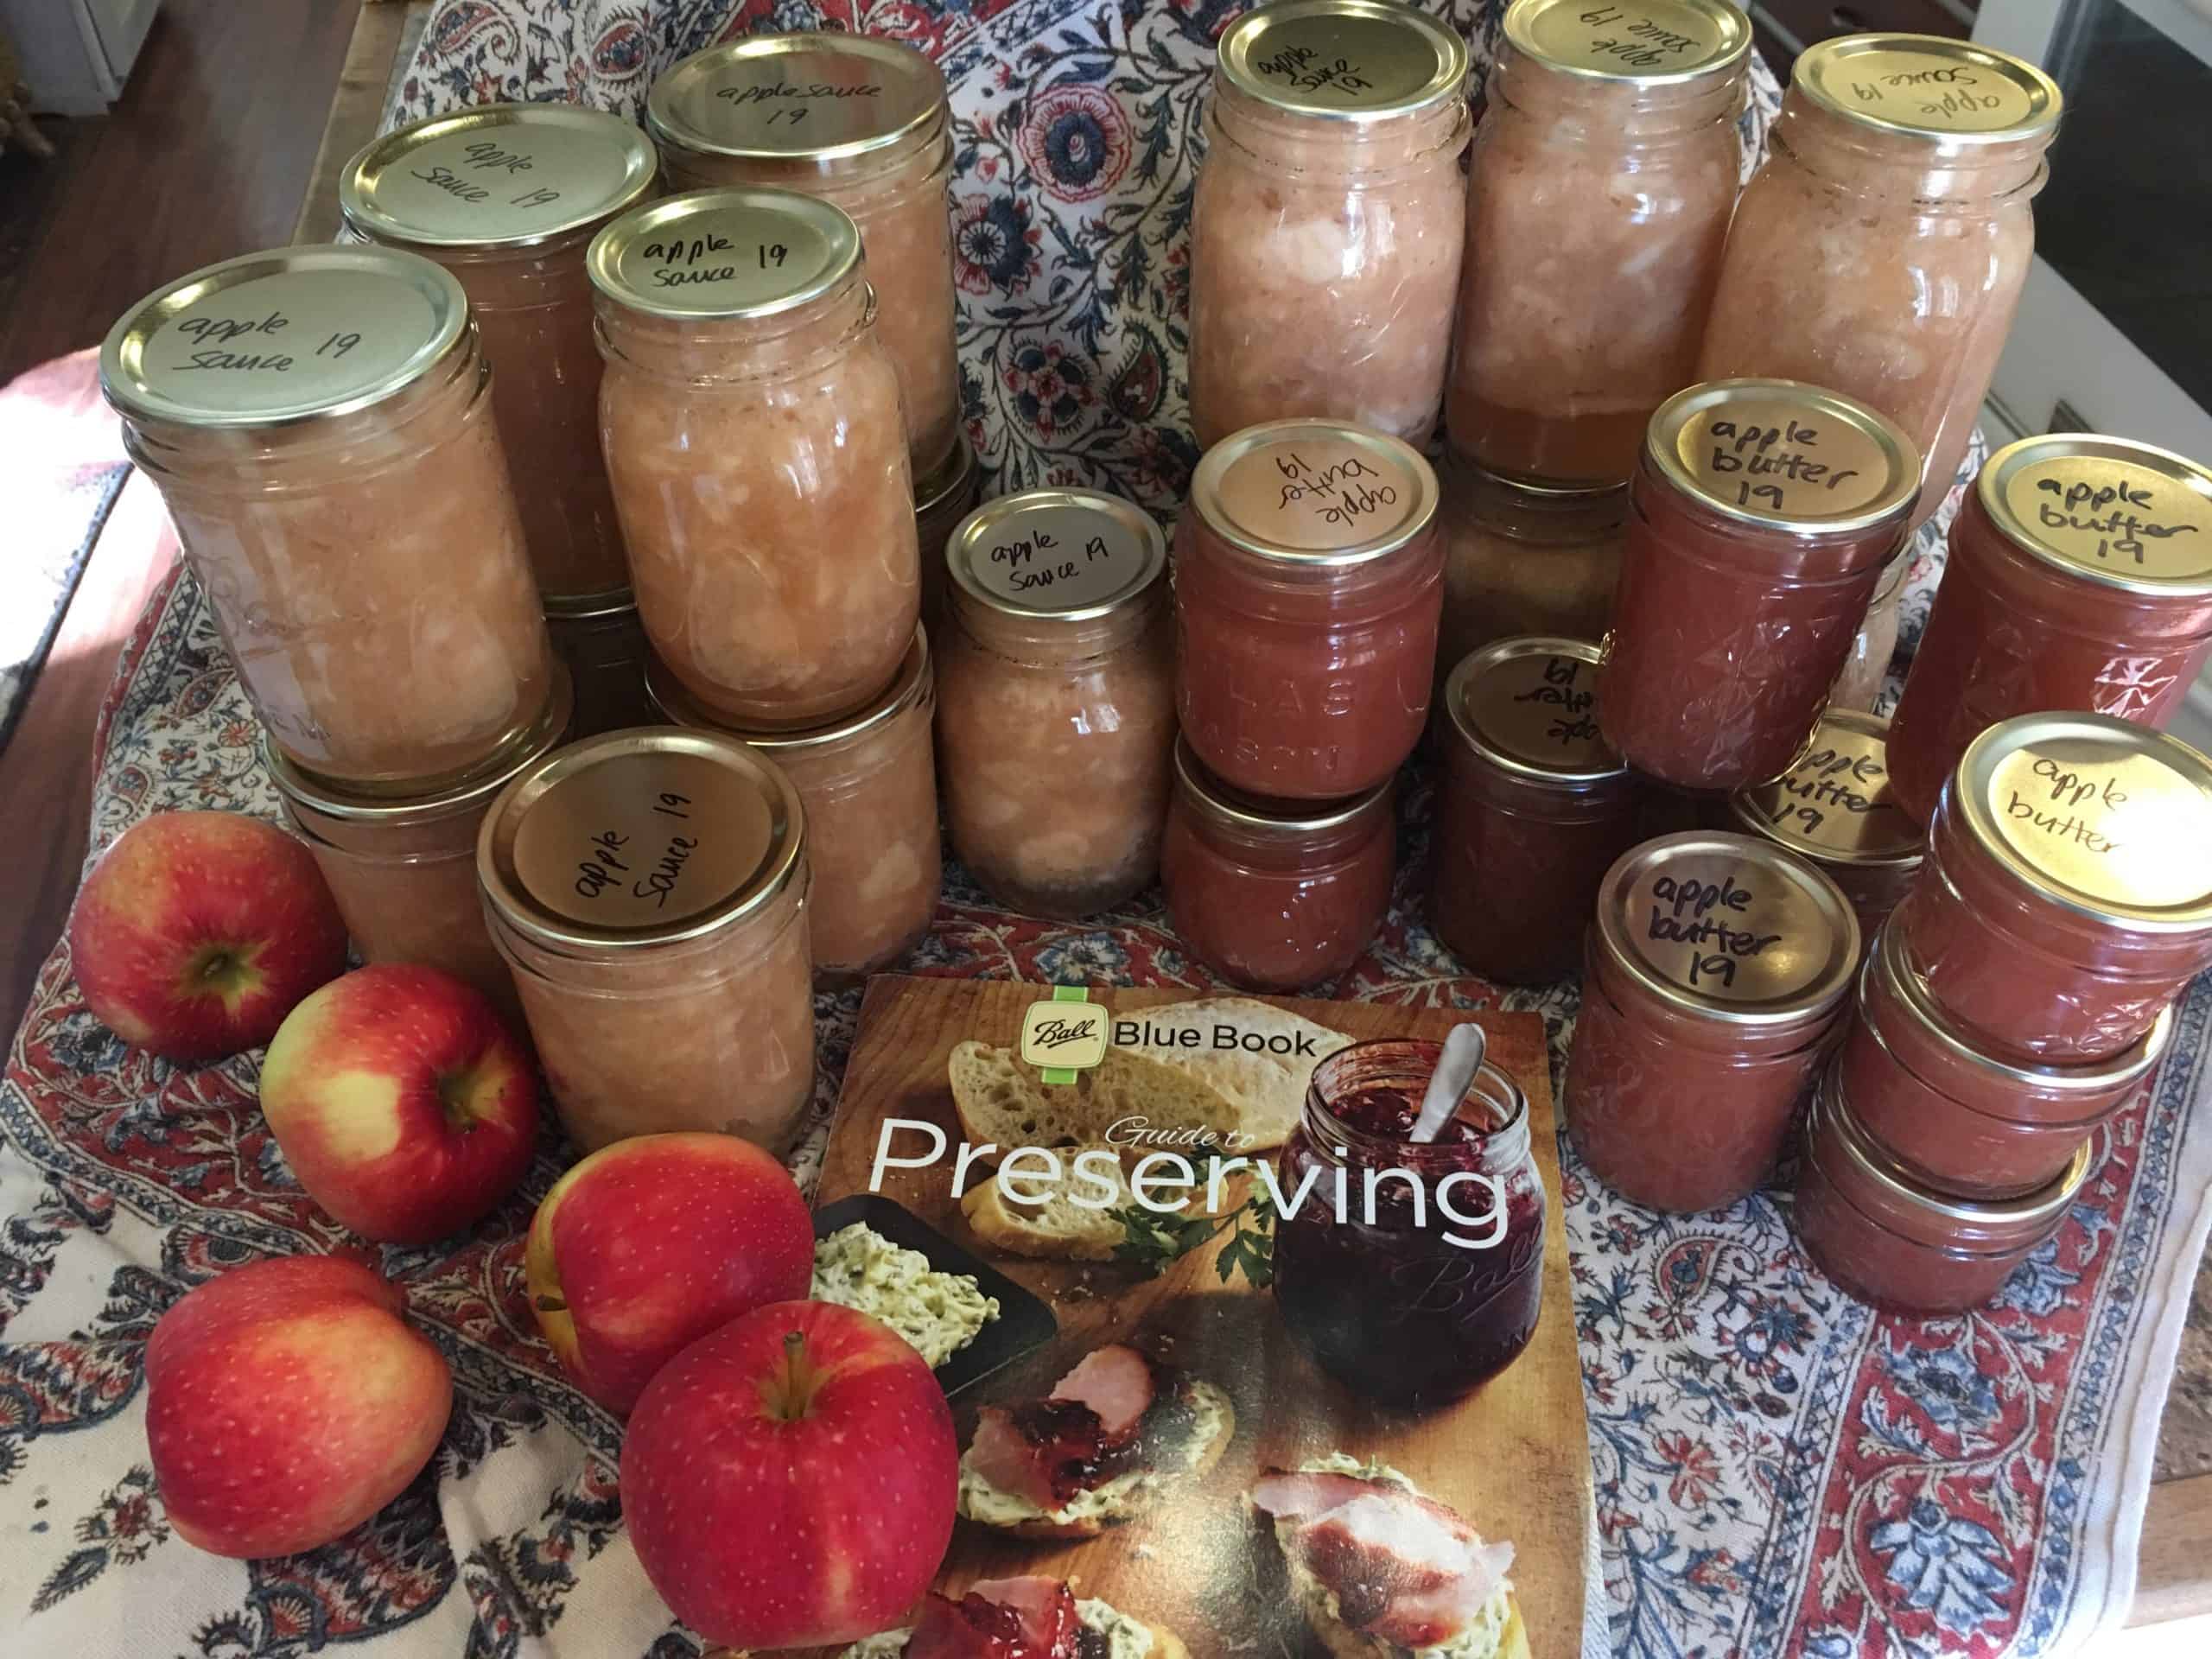 Applesauce and Apple Butter